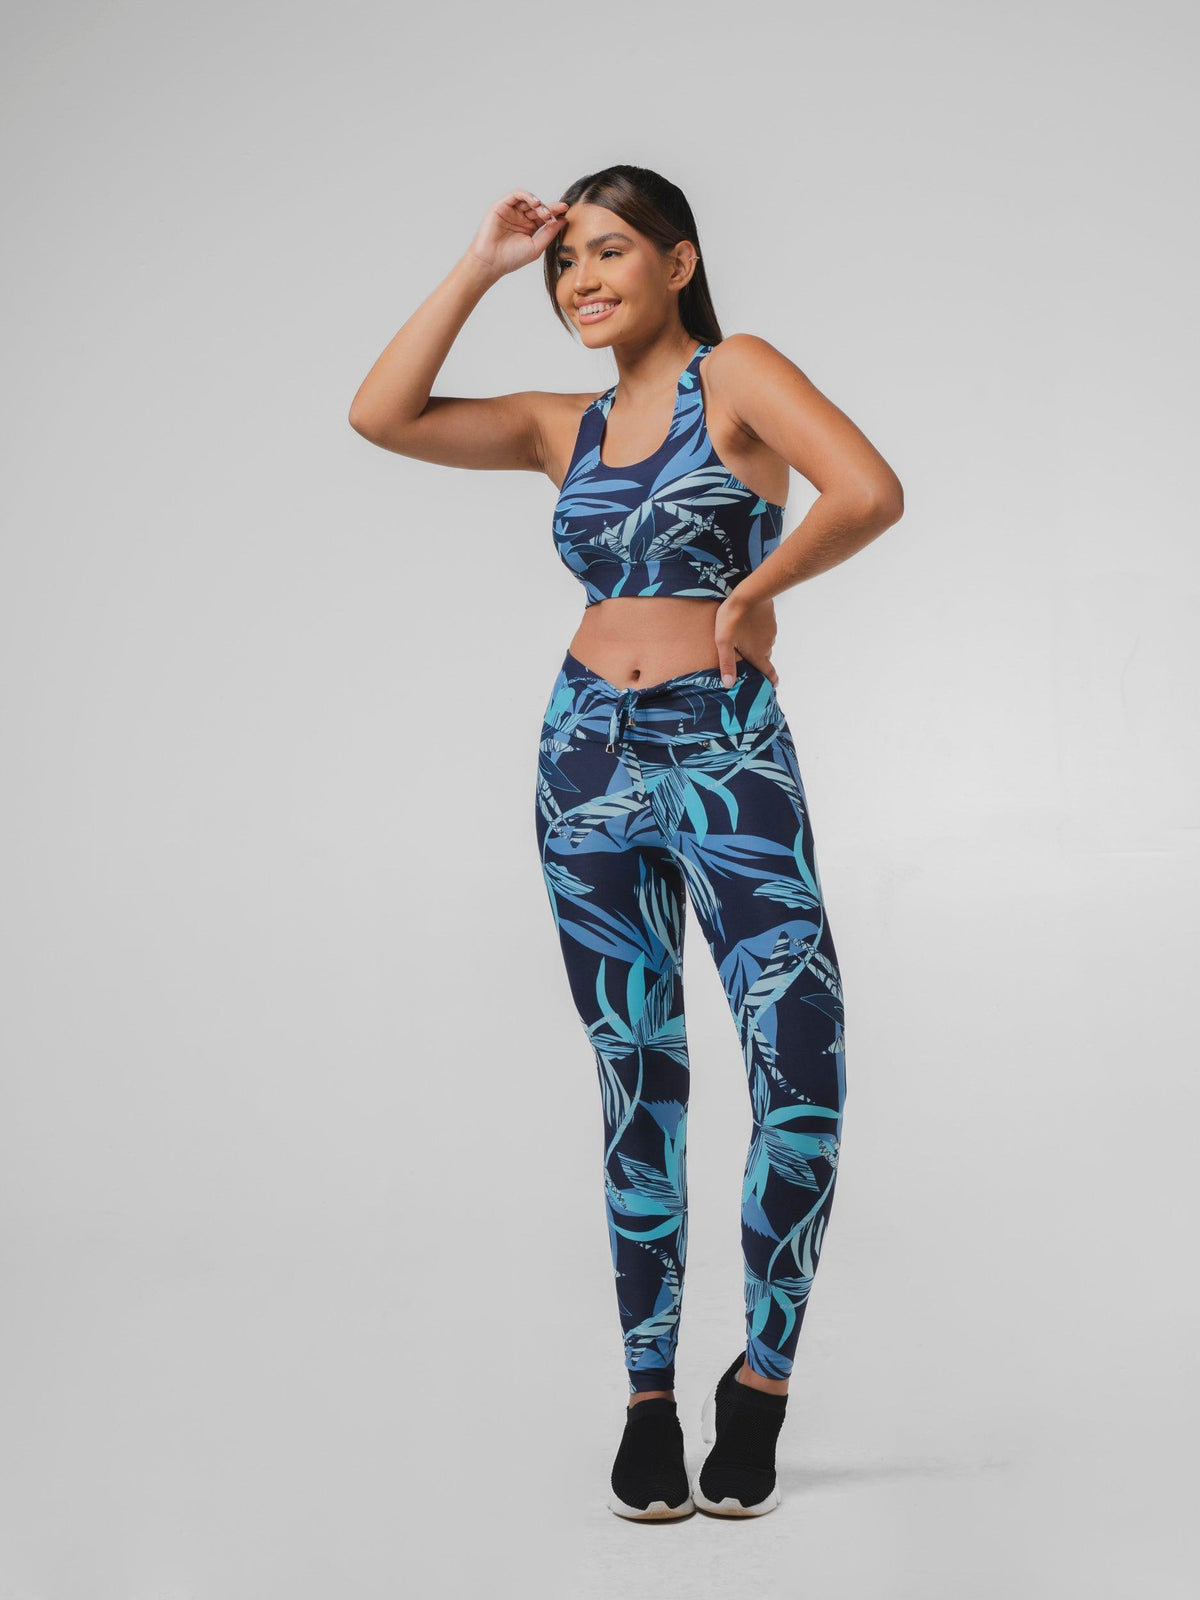 Shop Yoga clothing sets for women. Exclusively at BSA. Find our yoga pants,  yoga tops, high quality yoga outfit, high quality yoga outfit.